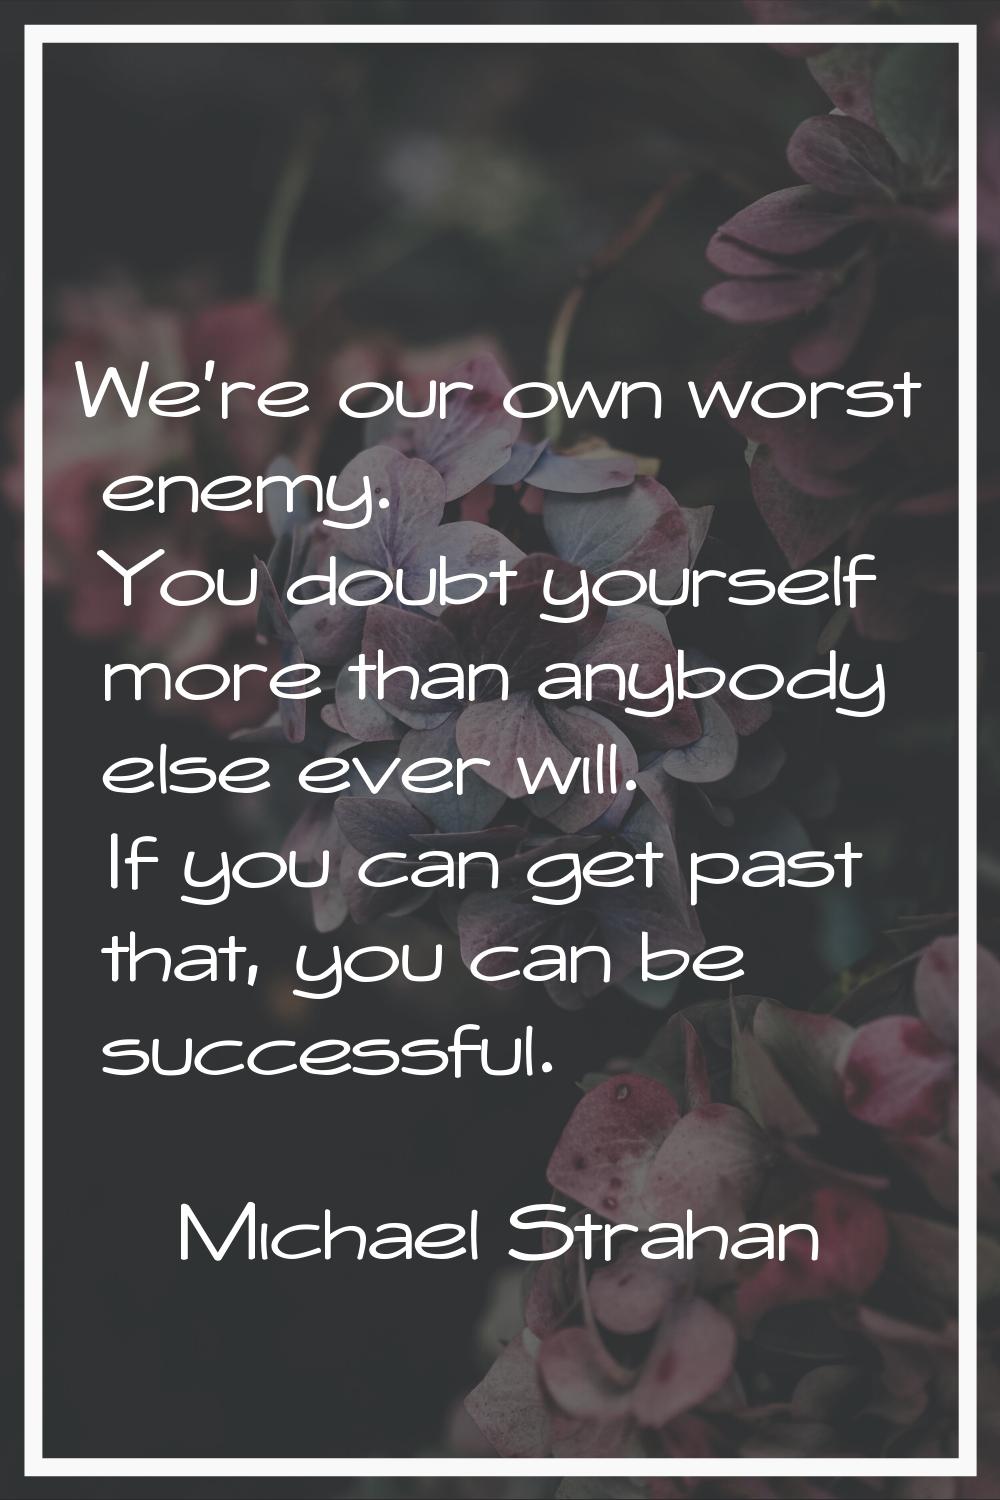 We're our own worst enemy. You doubt yourself more than anybody else ever will. If you can get past